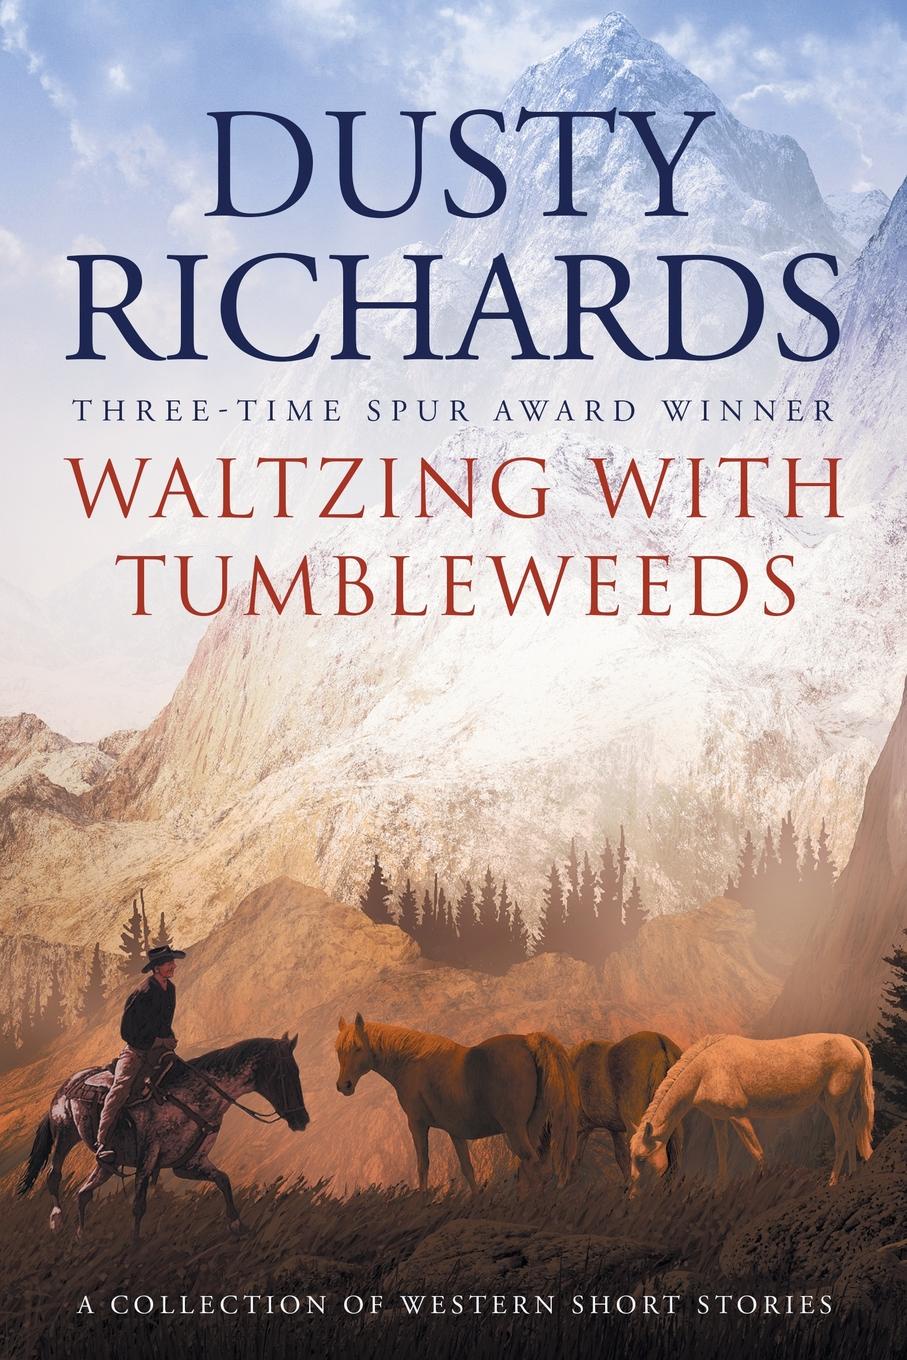 Waltzing With Tumbleweeds. A Collection of Western Short Stories